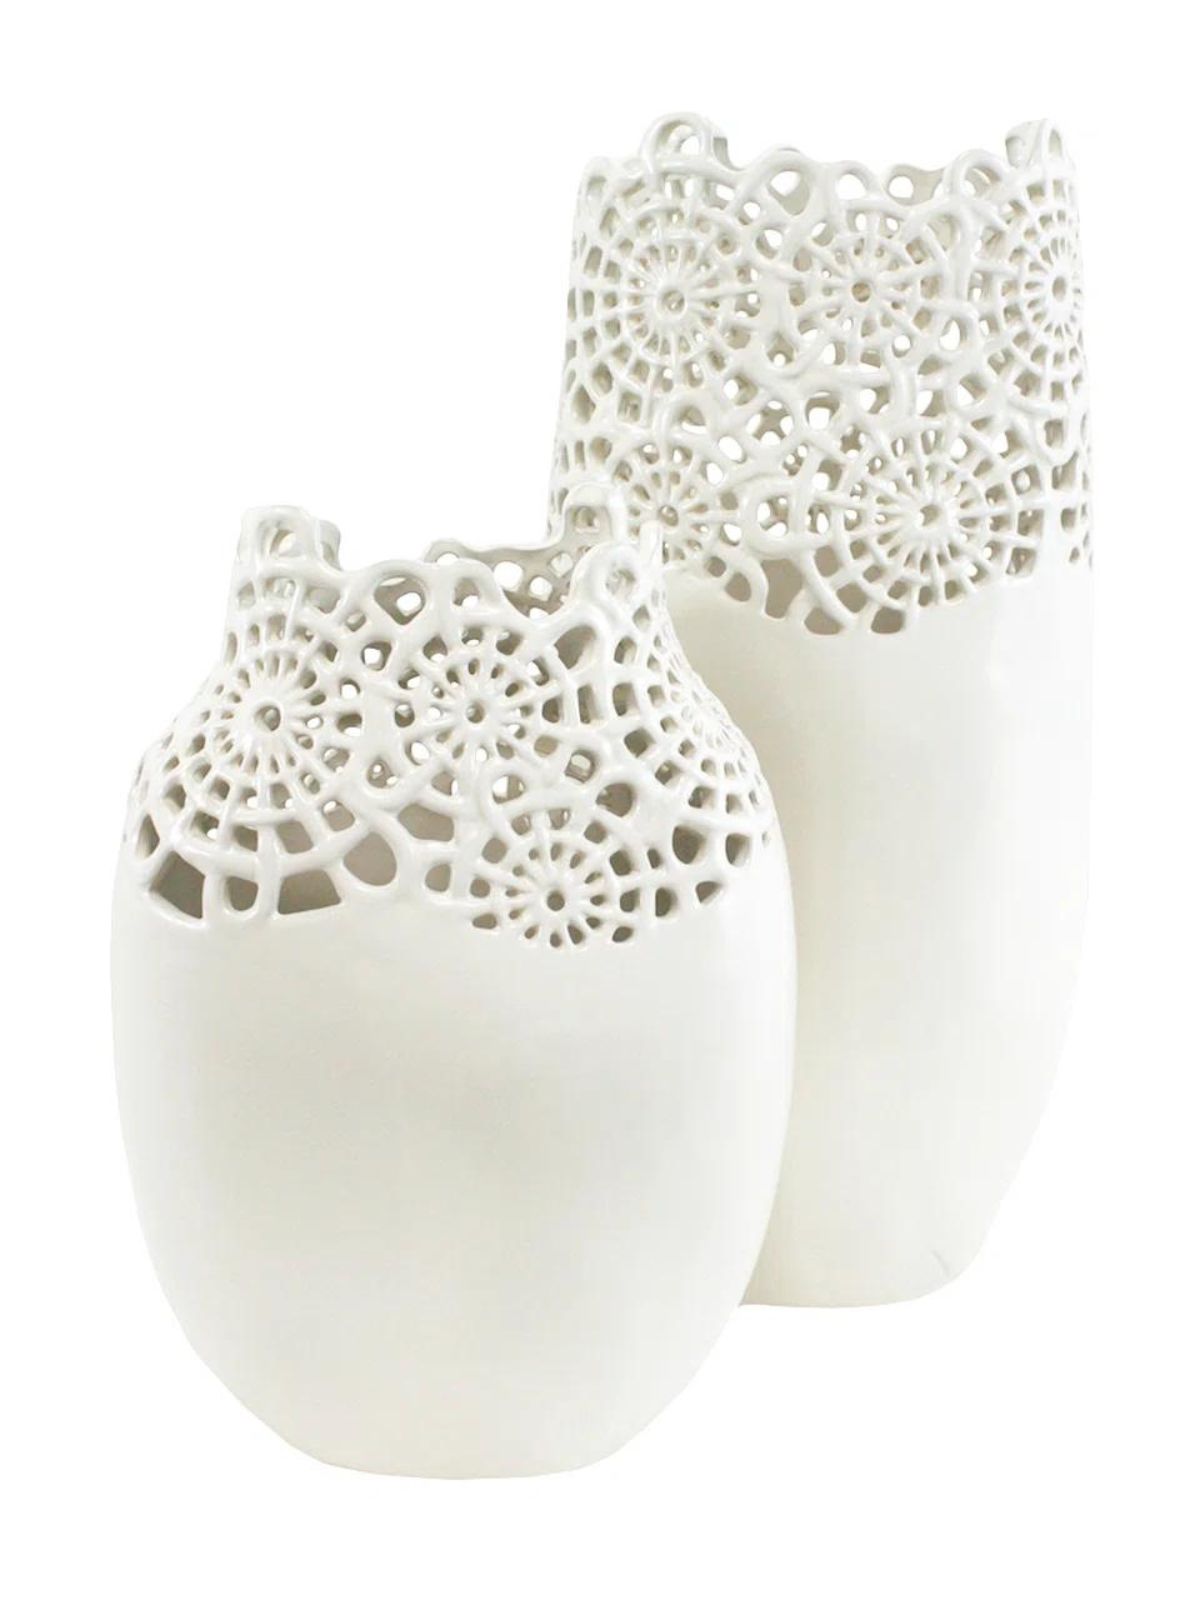 Set of 2 White Porcelain Vase with Doily Patterns sold by KYA Home Decor.